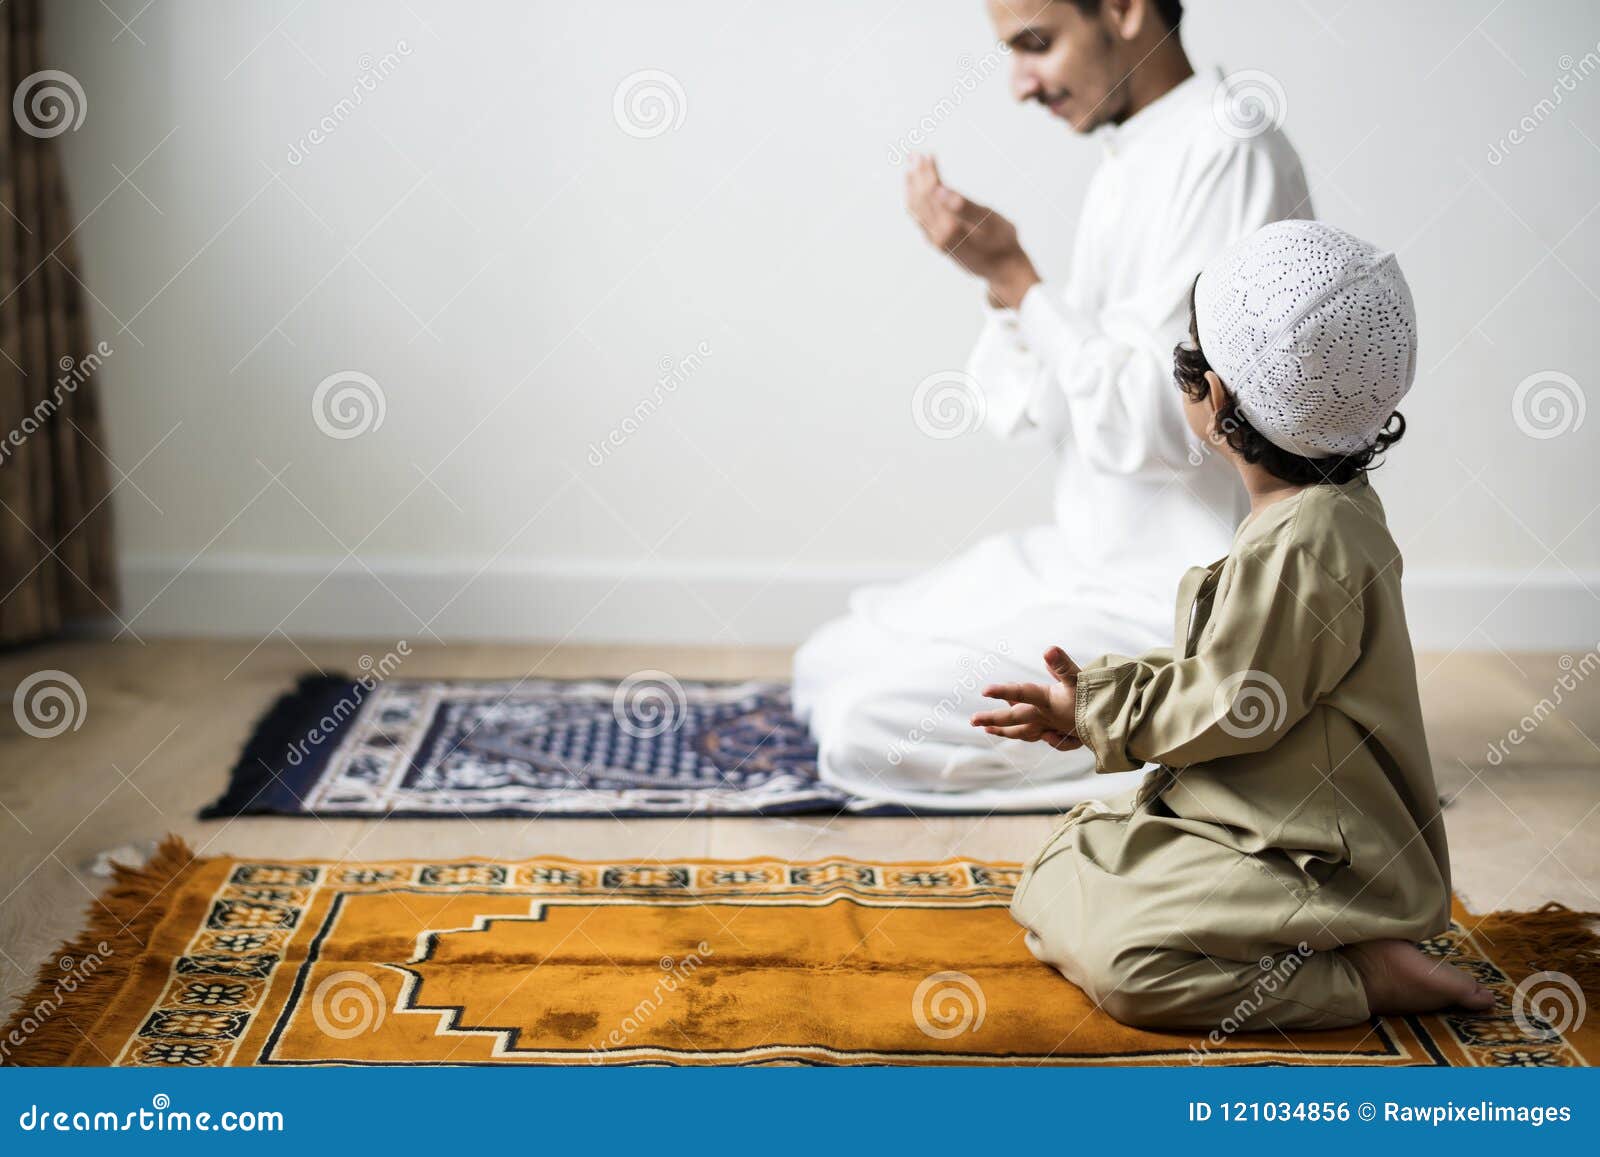 muslim boy learning how to make dua to allah